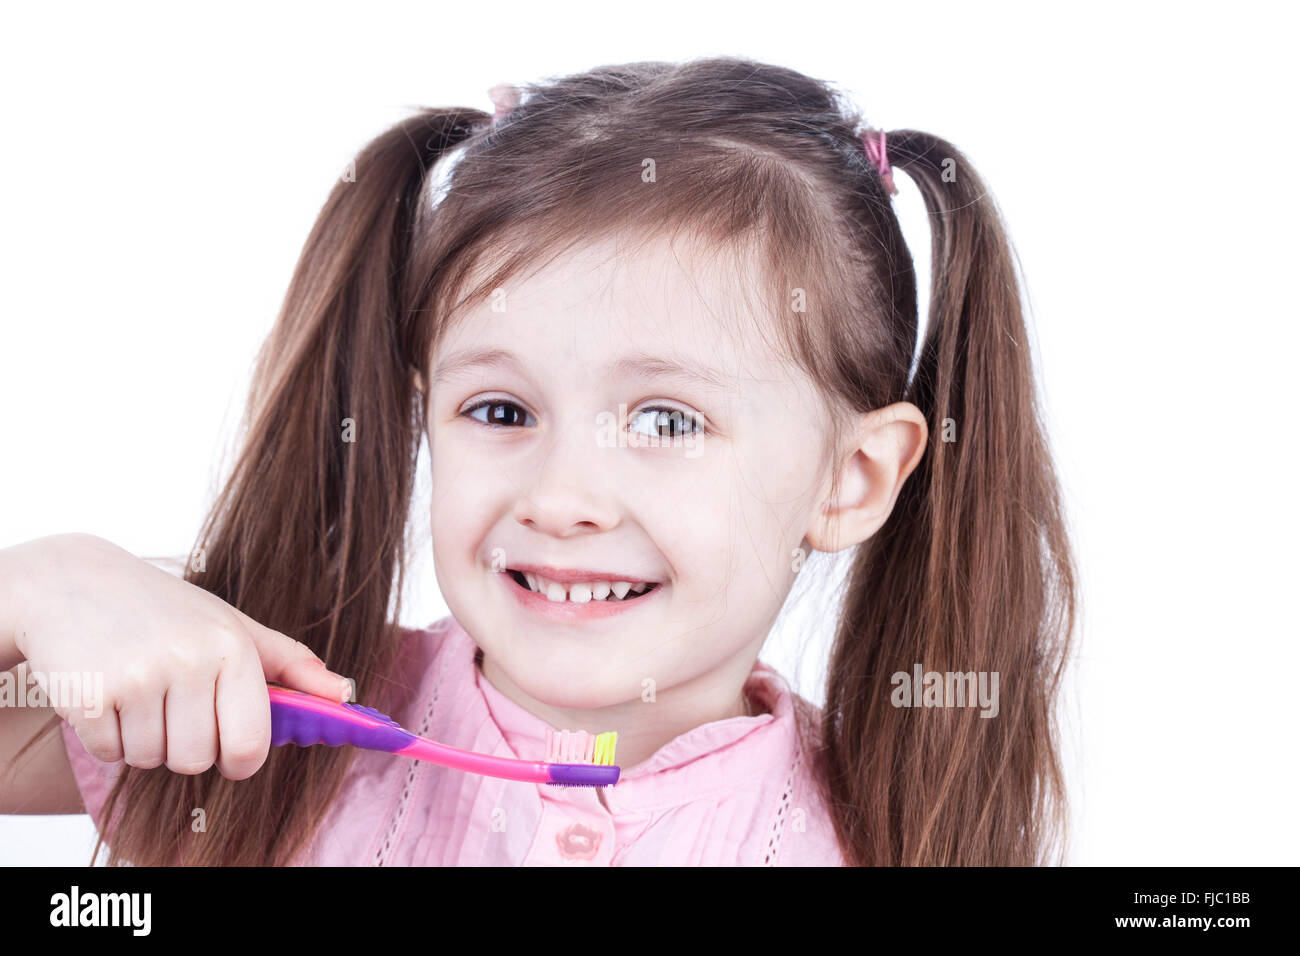 Child decayed teeth with toothbrush on white background Stock Photo